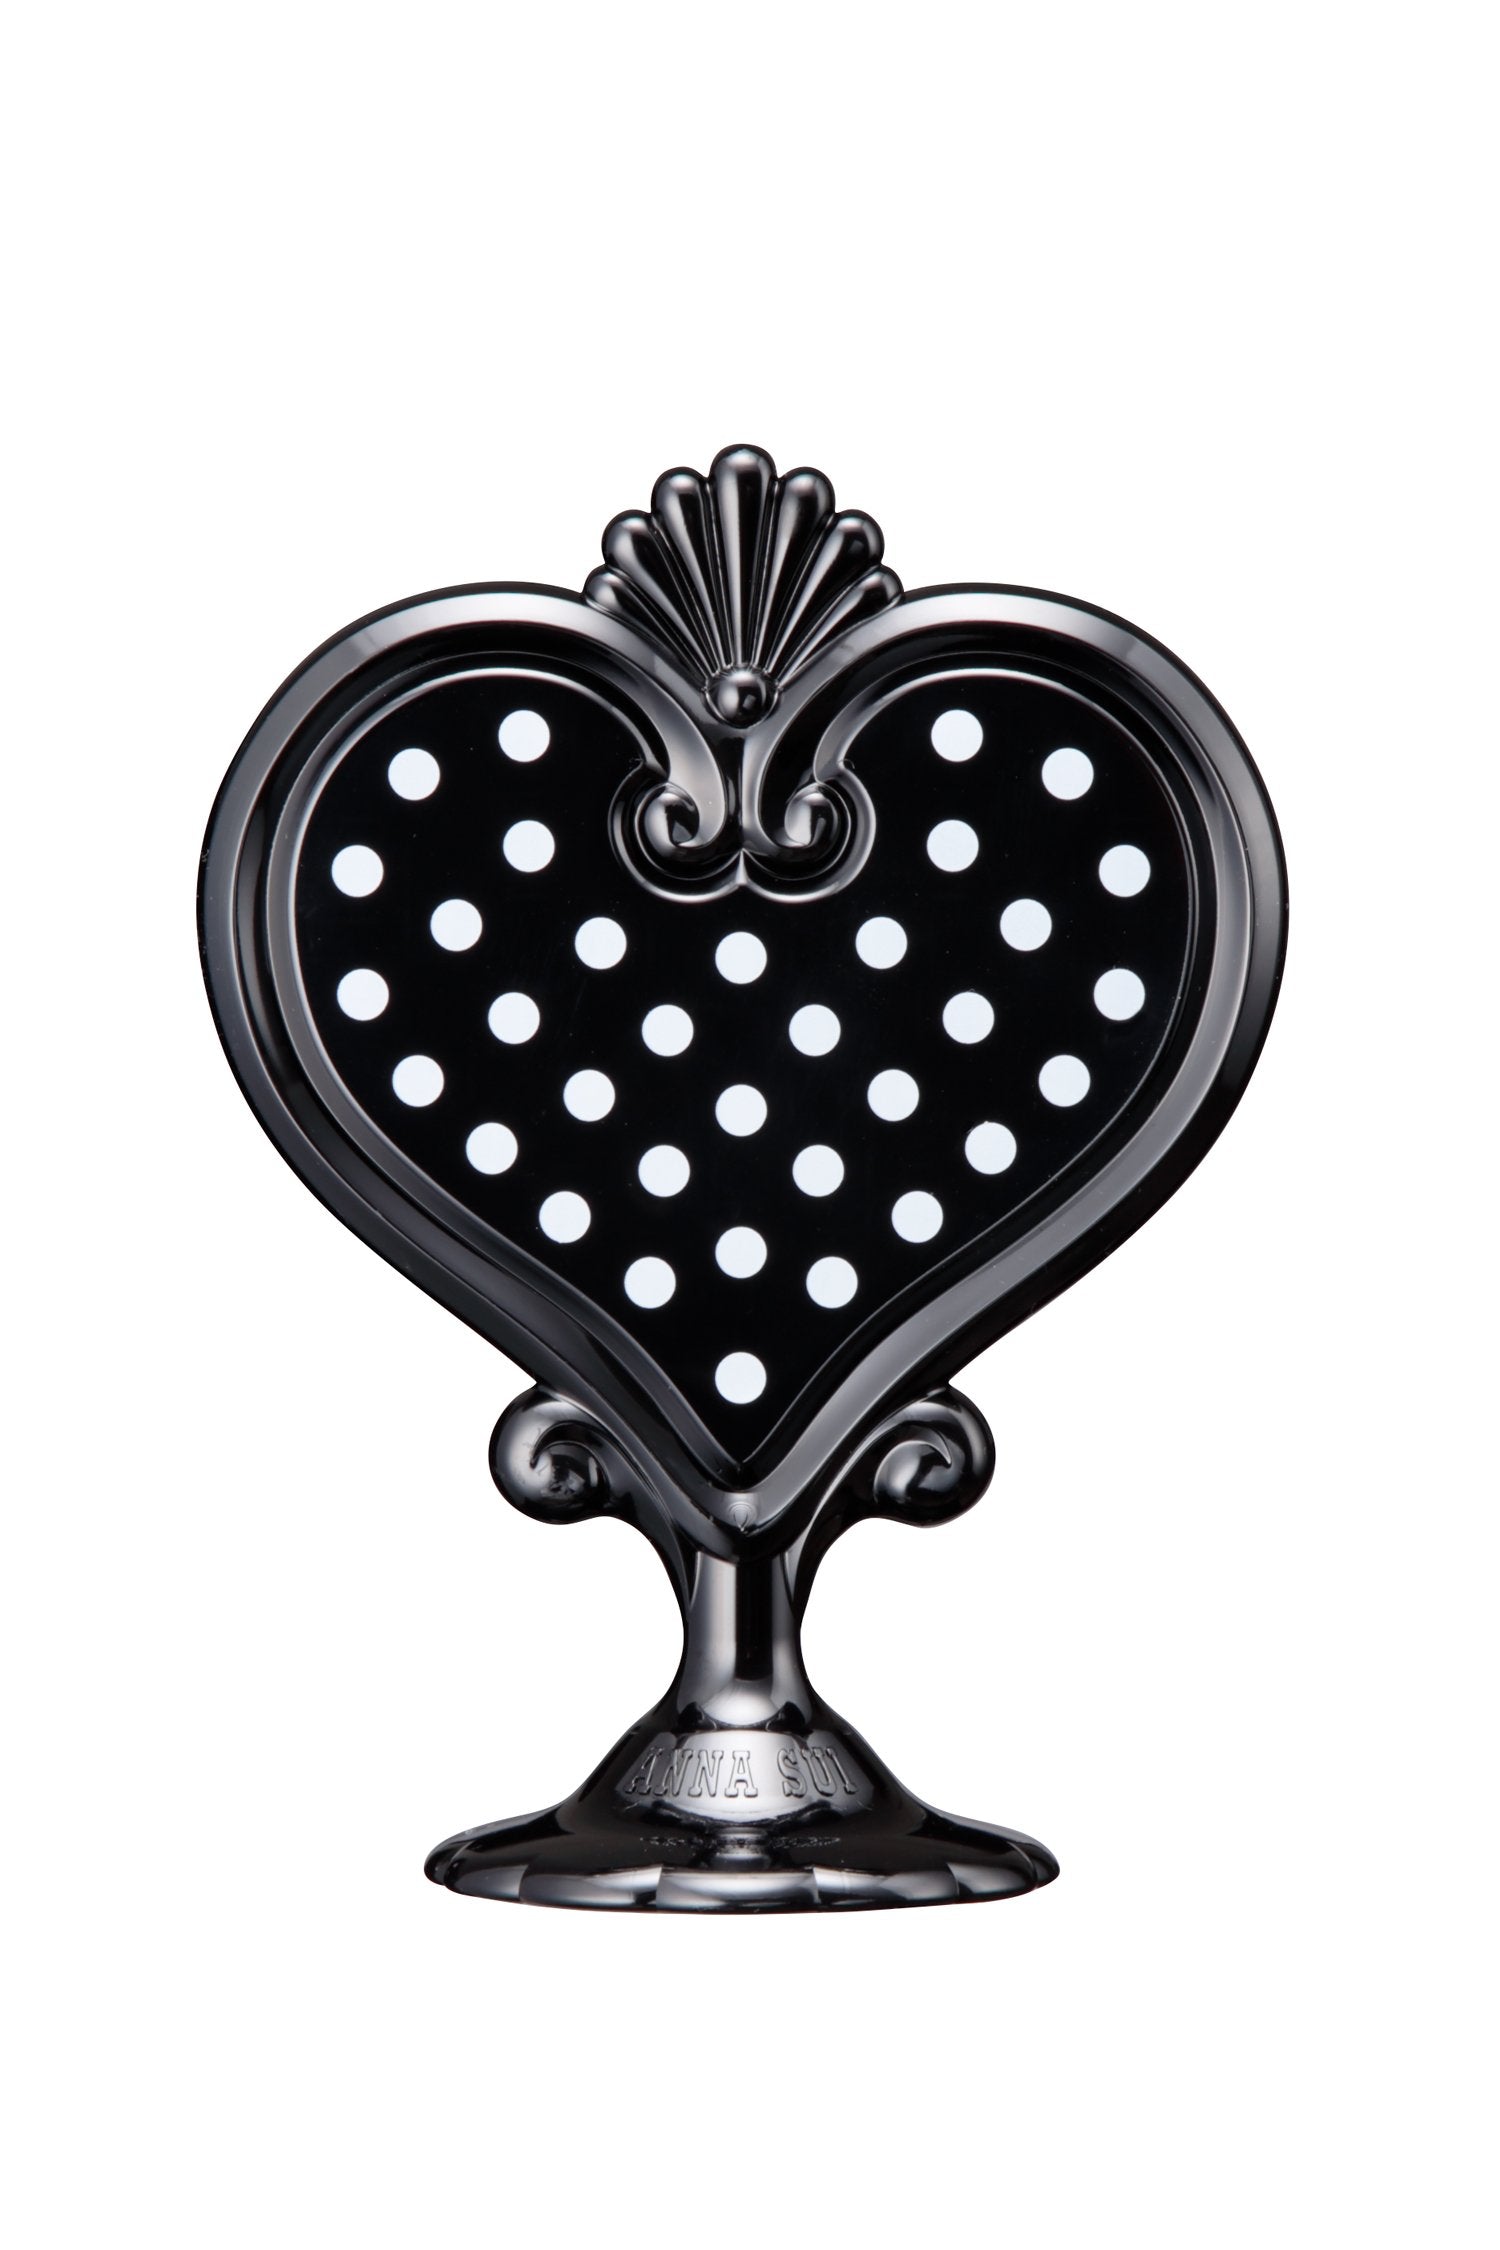 Black Stand Mirror in a heart-shaped with white dots in it on one side, mirror on the other, on a stand with Anna branding